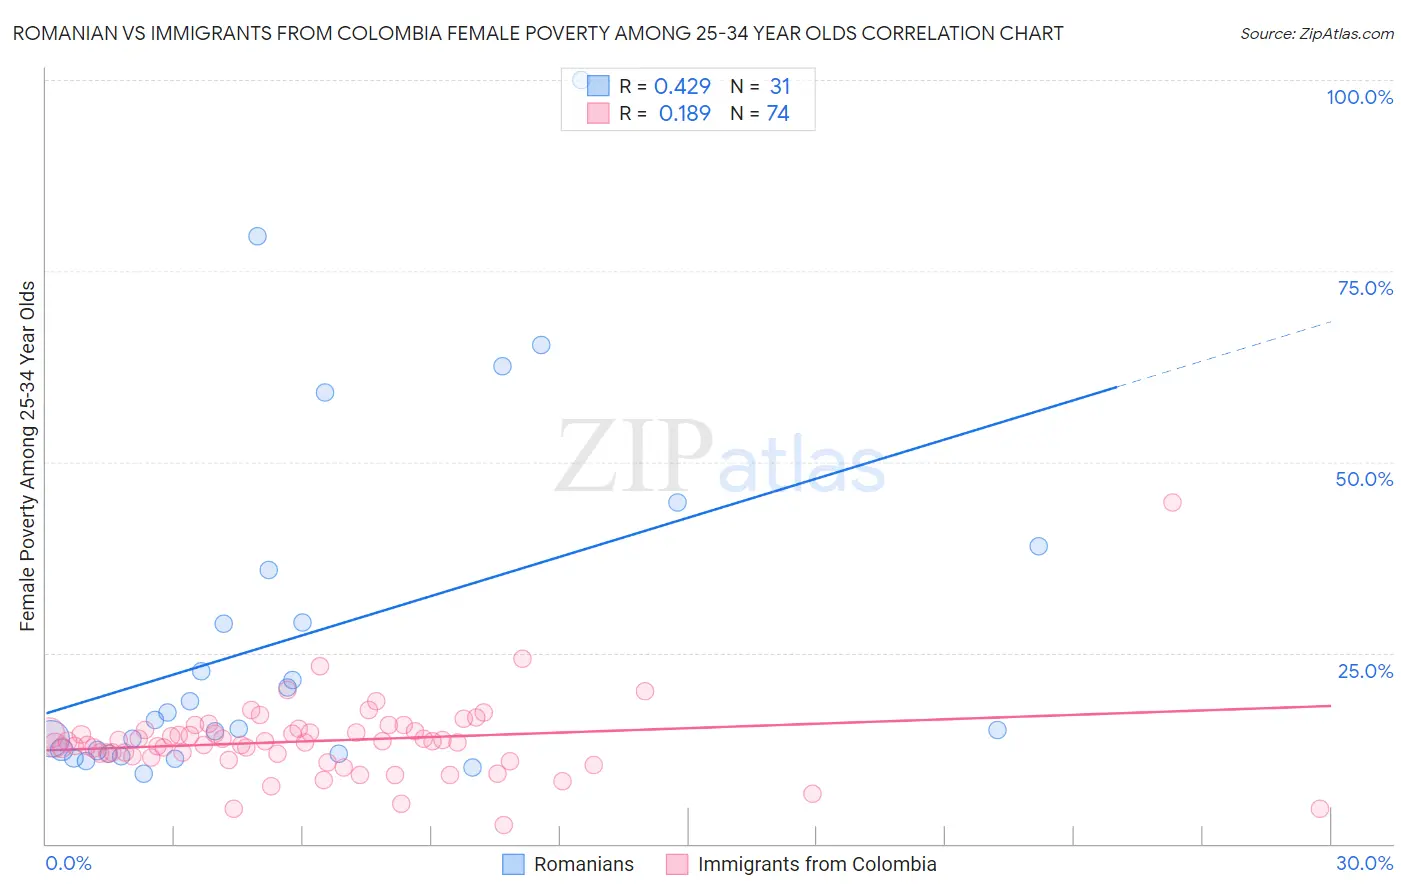 Romanian vs Immigrants from Colombia Female Poverty Among 25-34 Year Olds